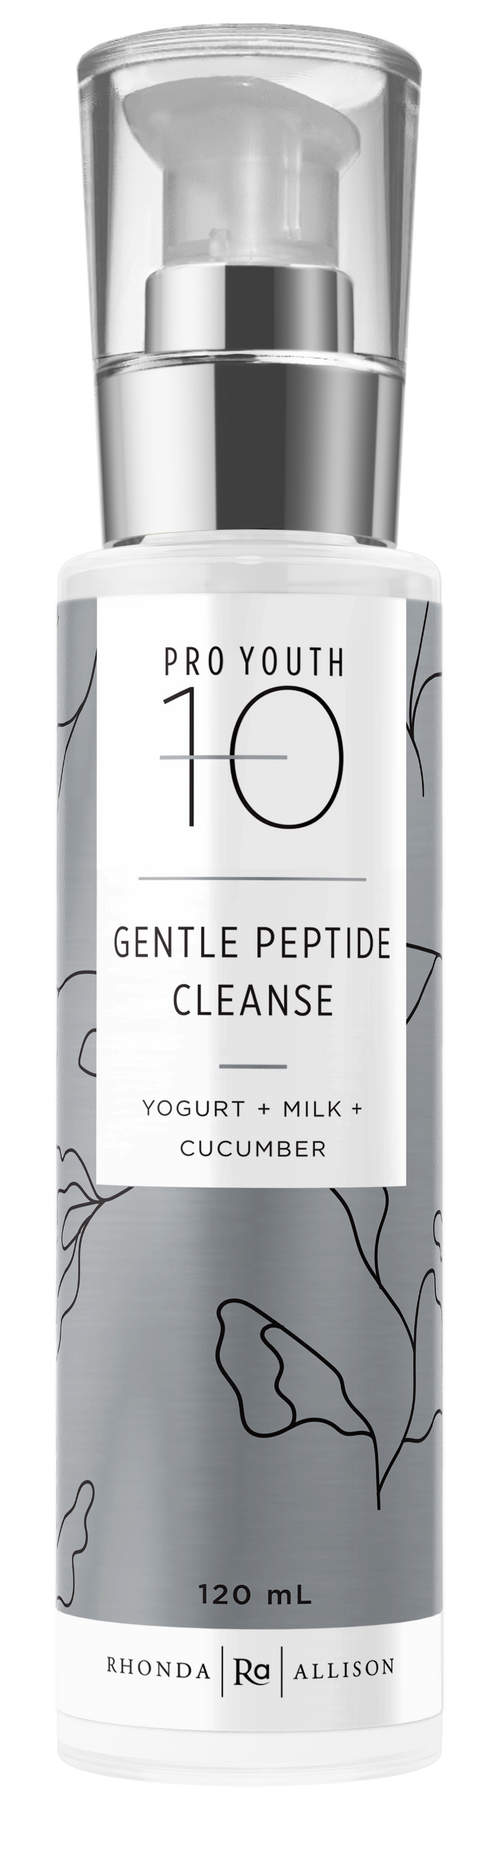 4 oz Gentle Peptide Cleanse